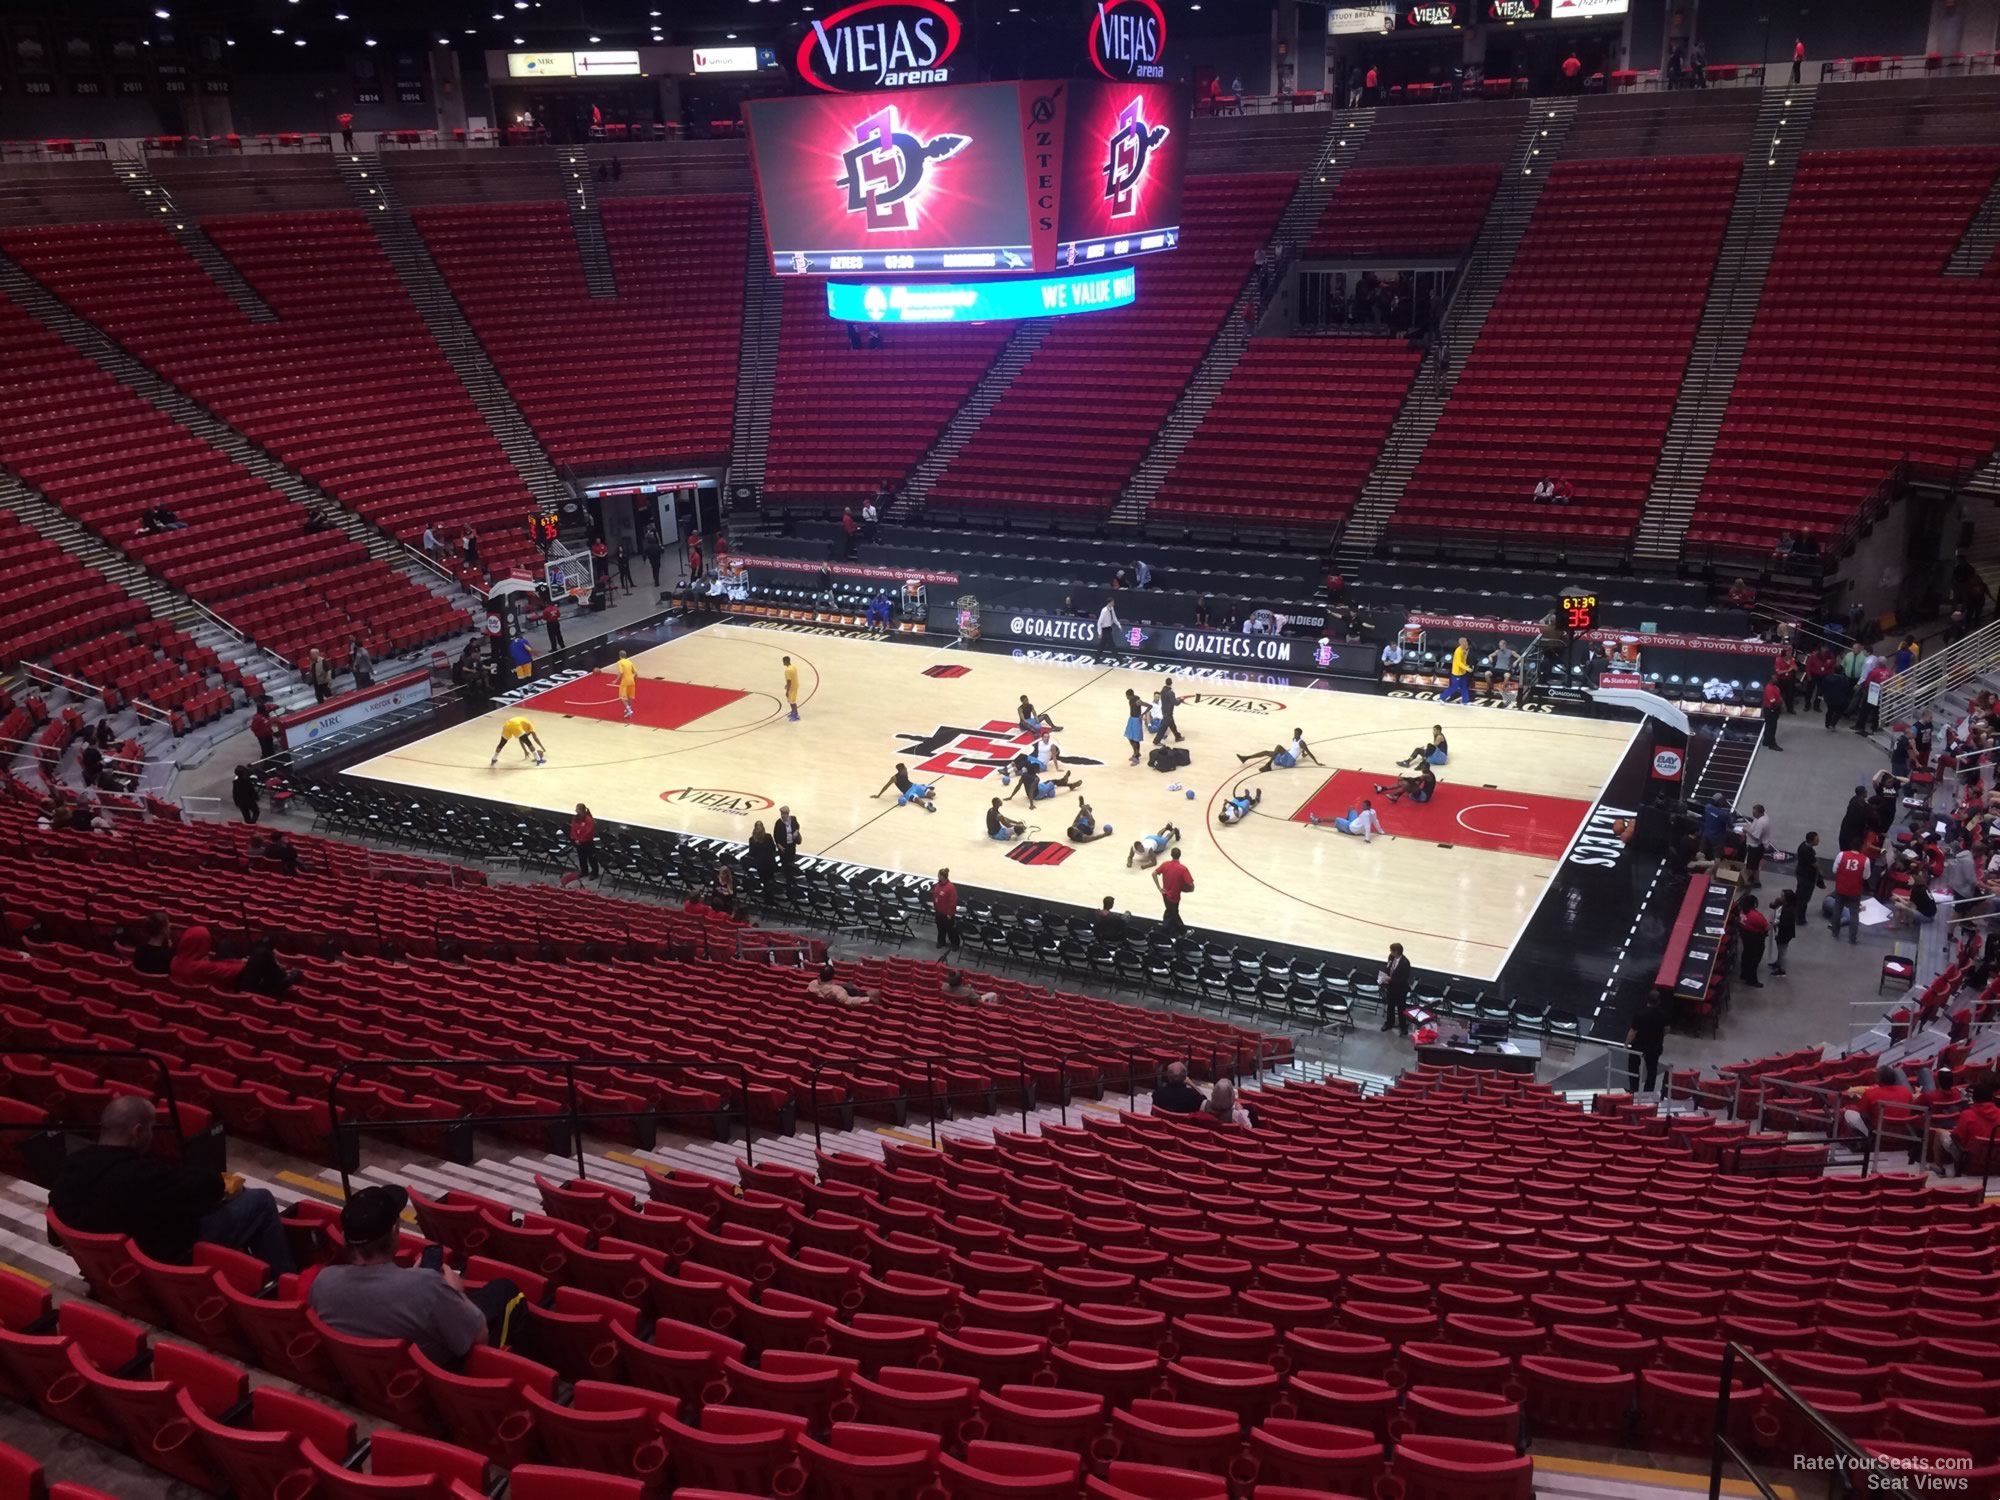 section h, row 30 seat view  - viejas arena